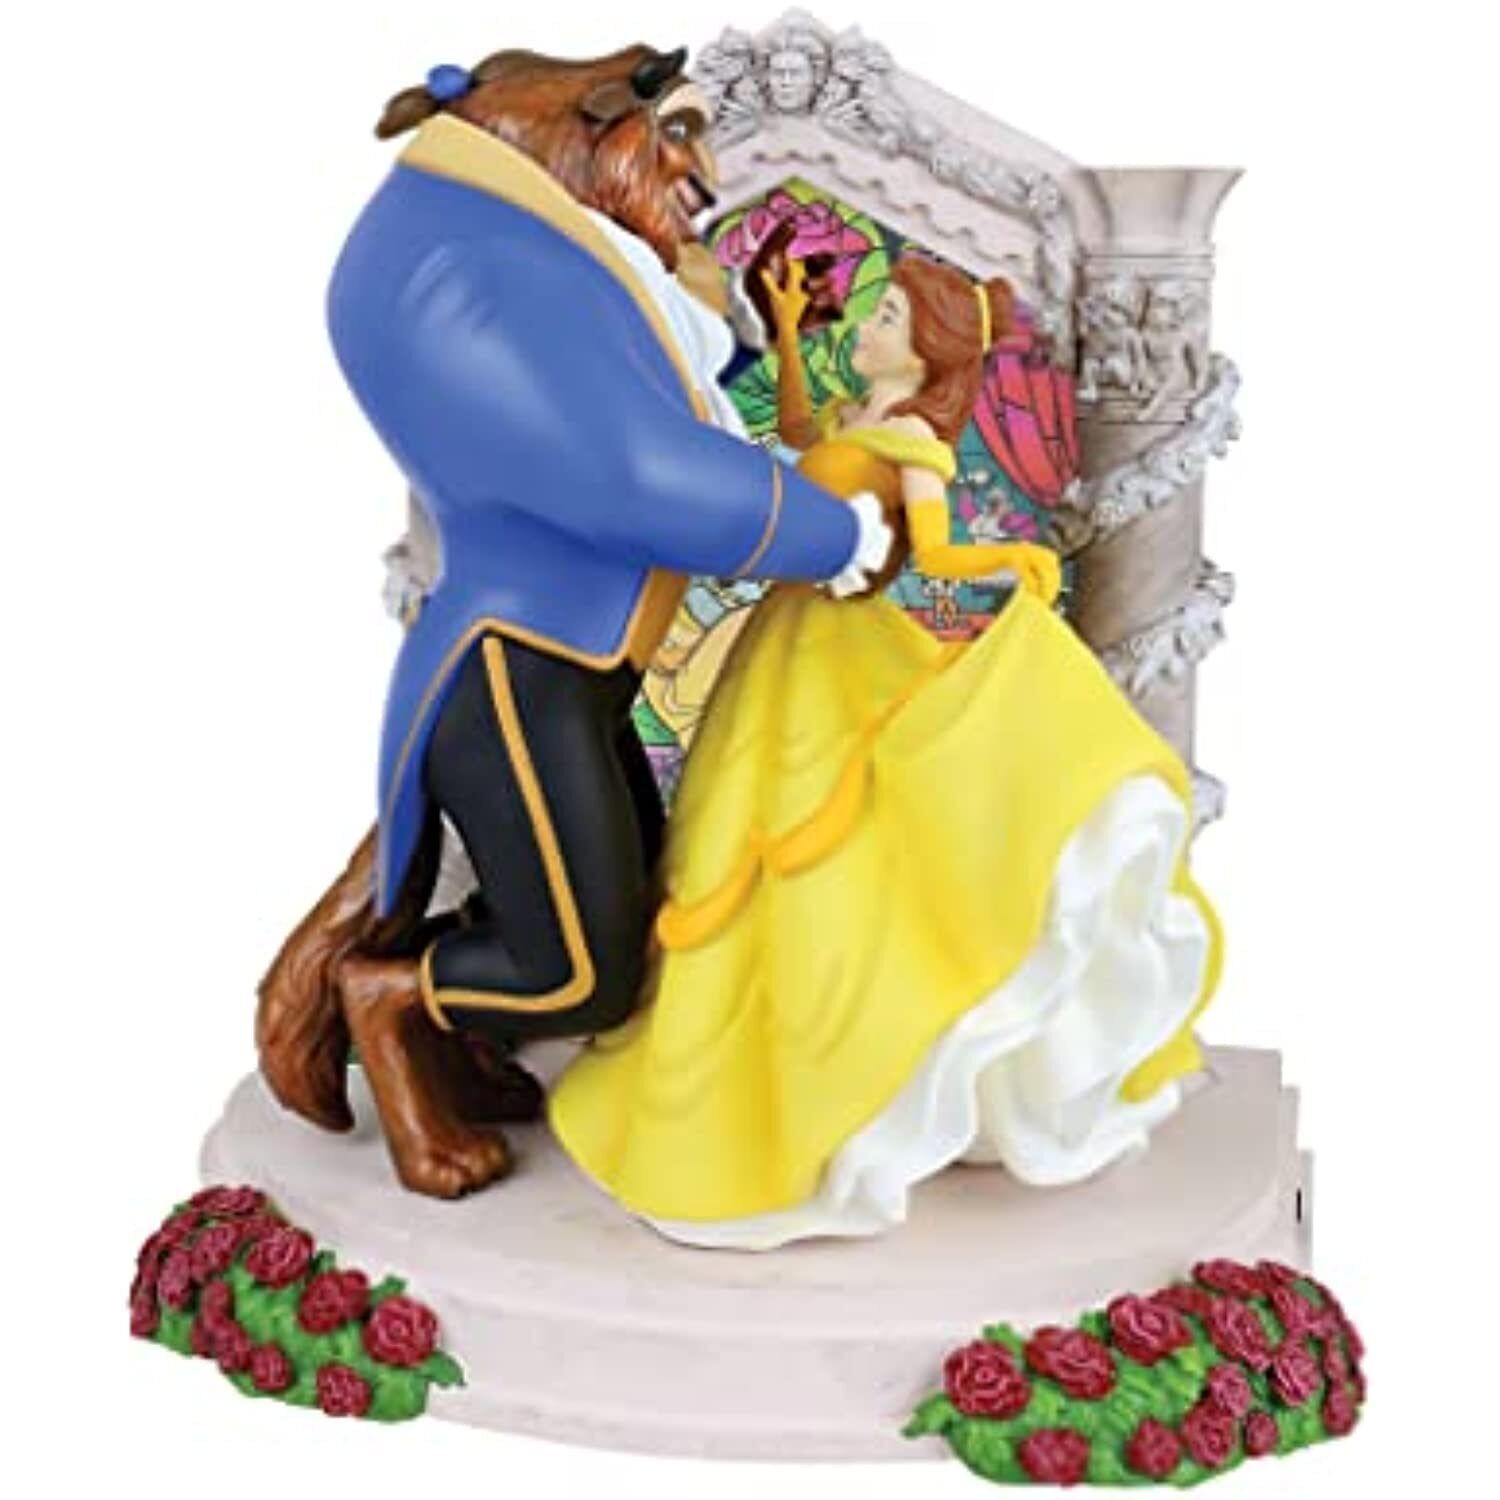 Disney Showcase Beauty and The Beast Belle Dancing Lit Figurine 9 Inch 6010730